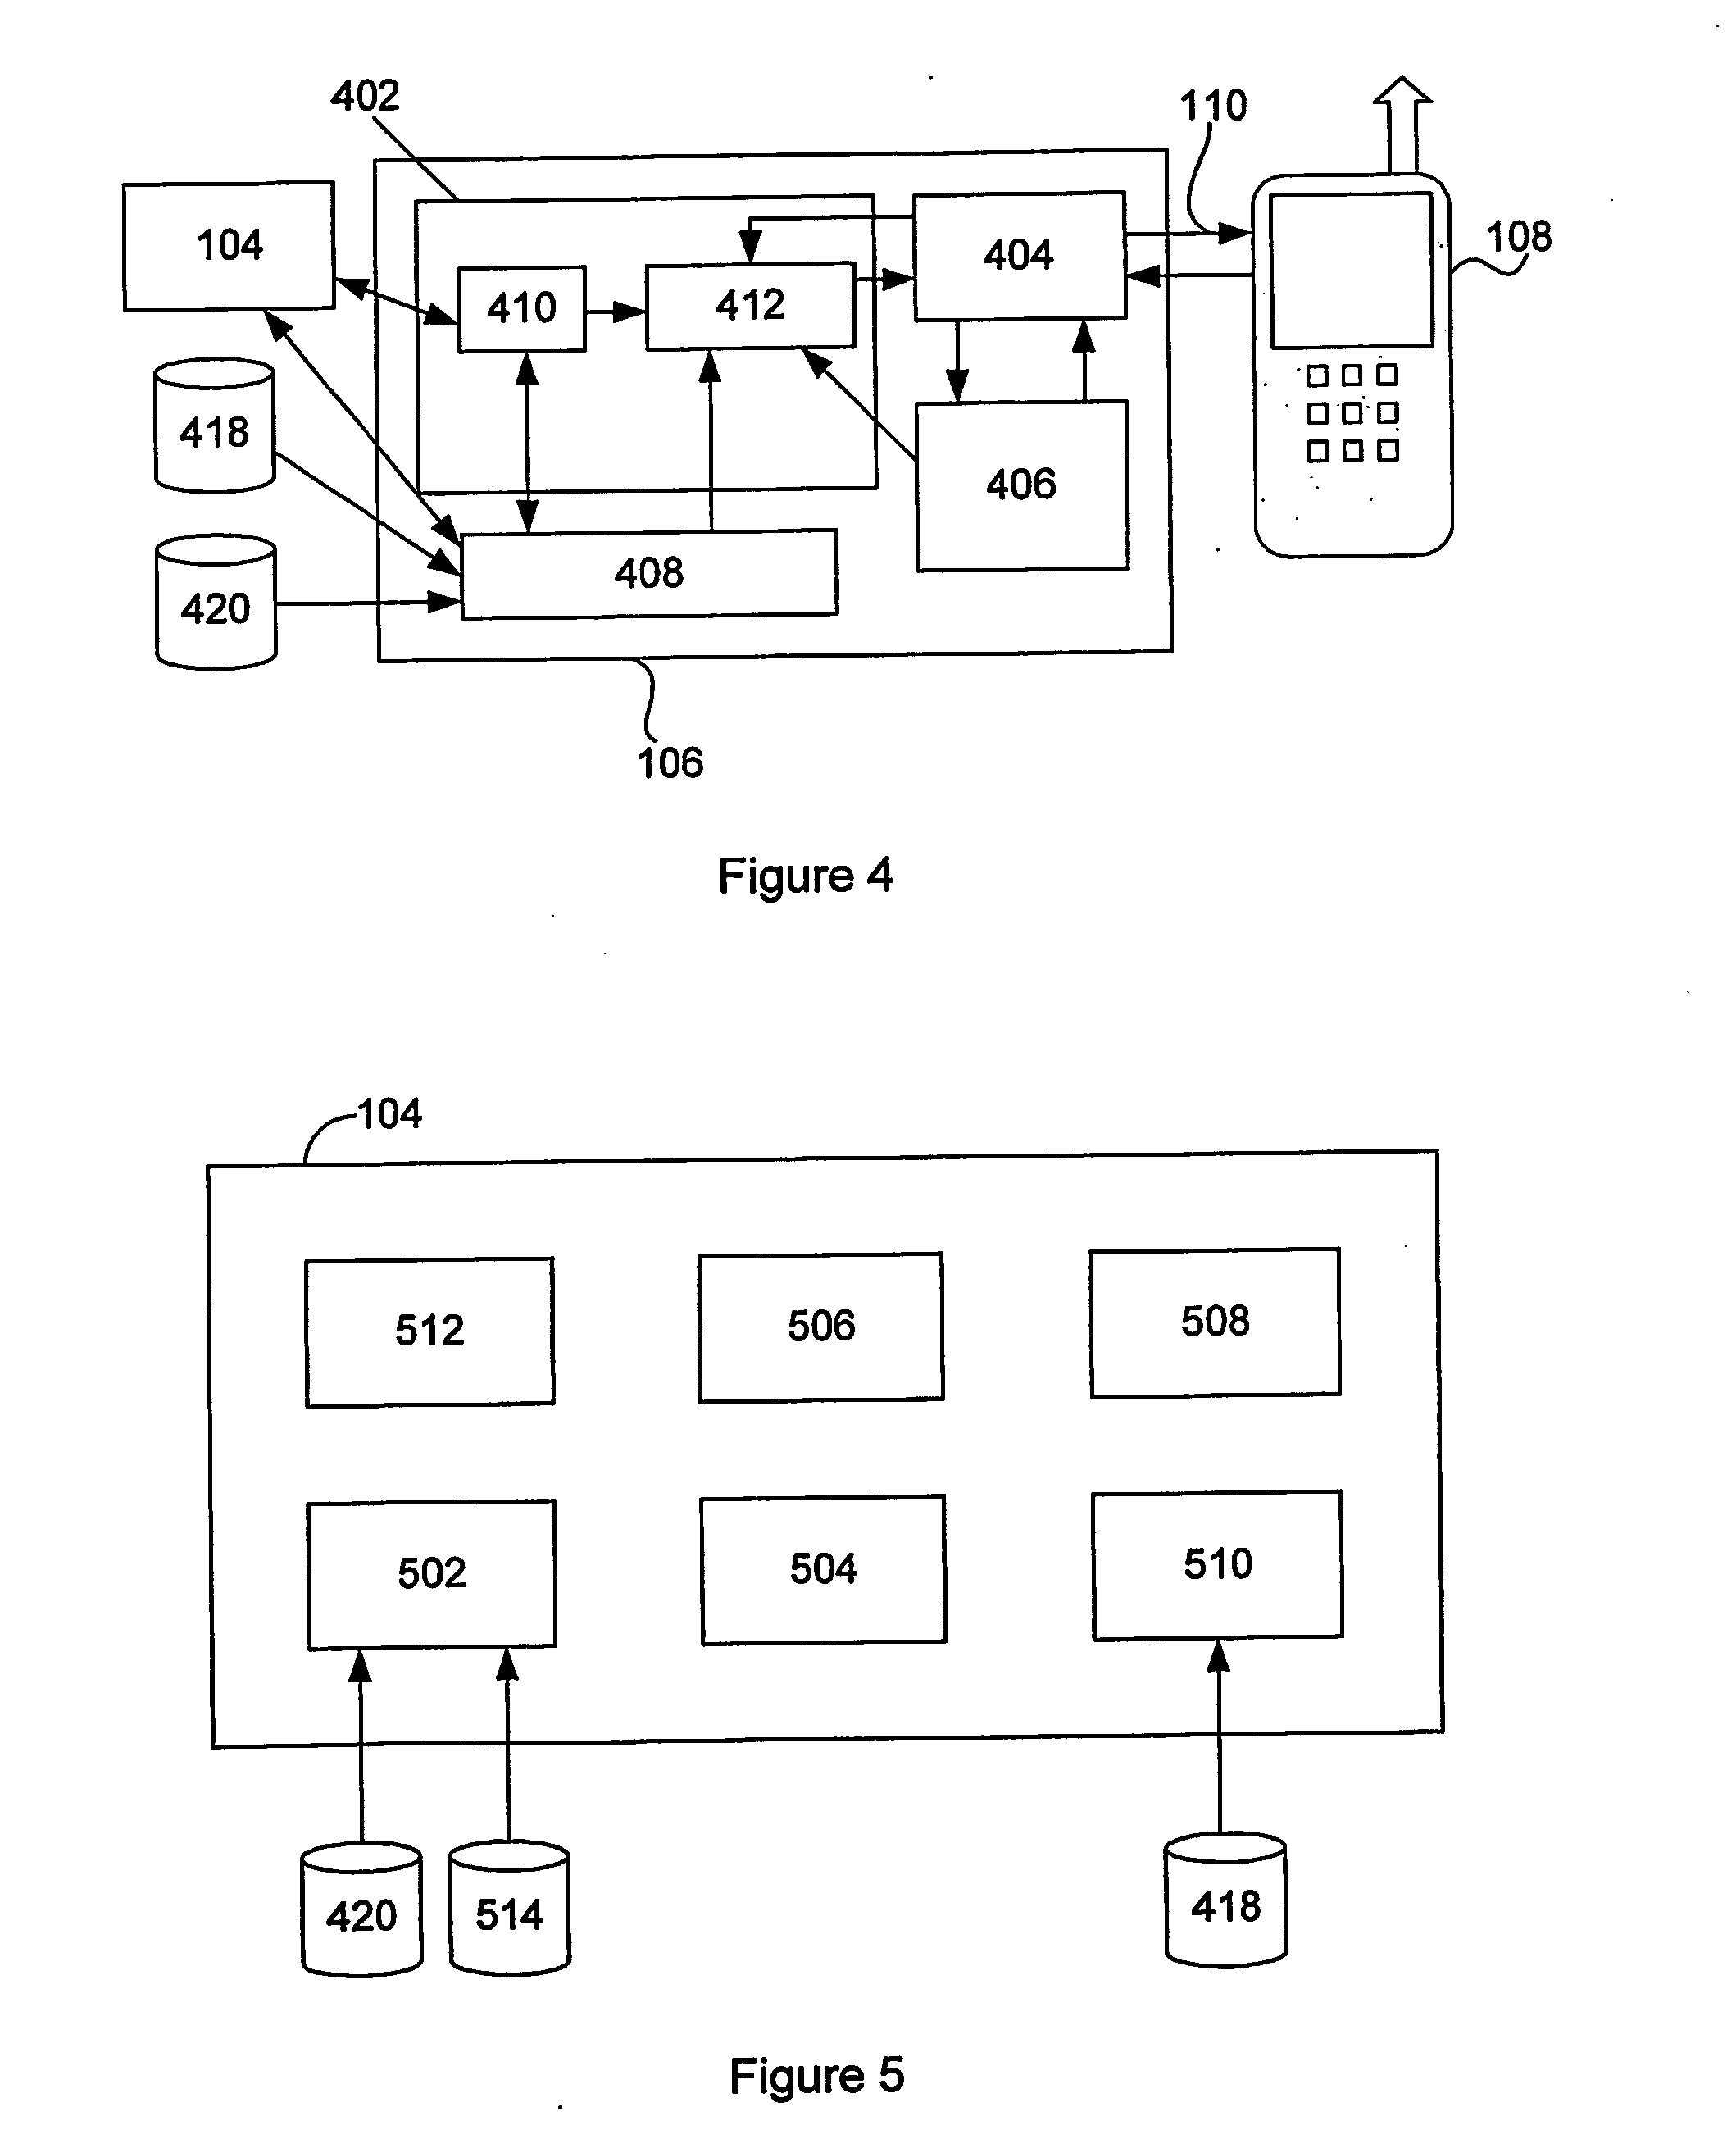 Multimedia publishing system for wireless devices